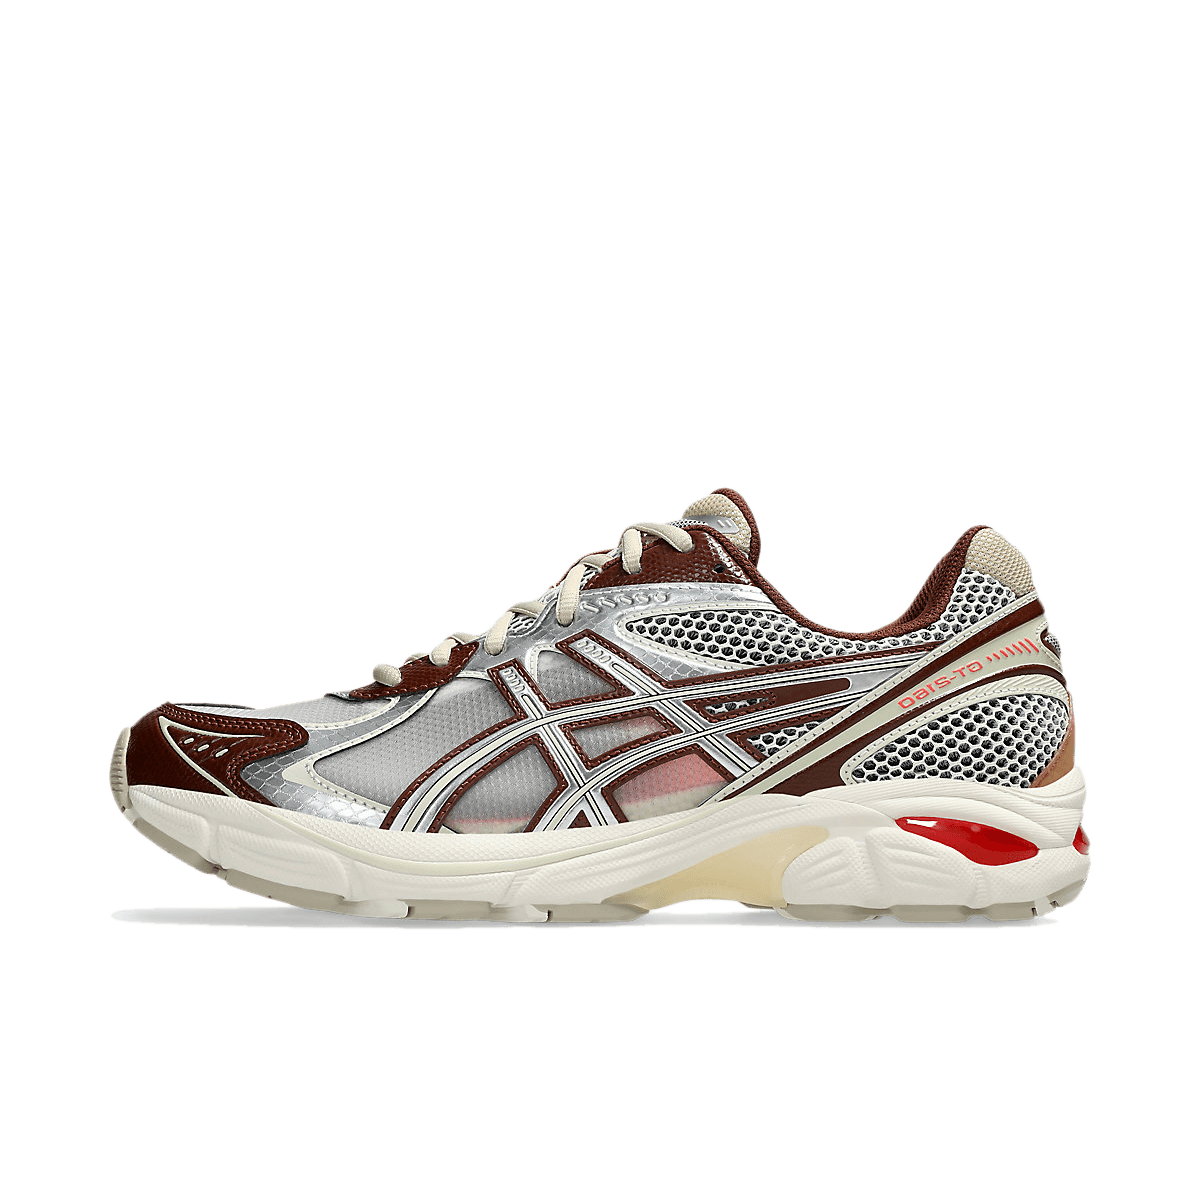 Above The Clouds x ASICS GT-2160 'Chocolate Brown' 1203A654-100